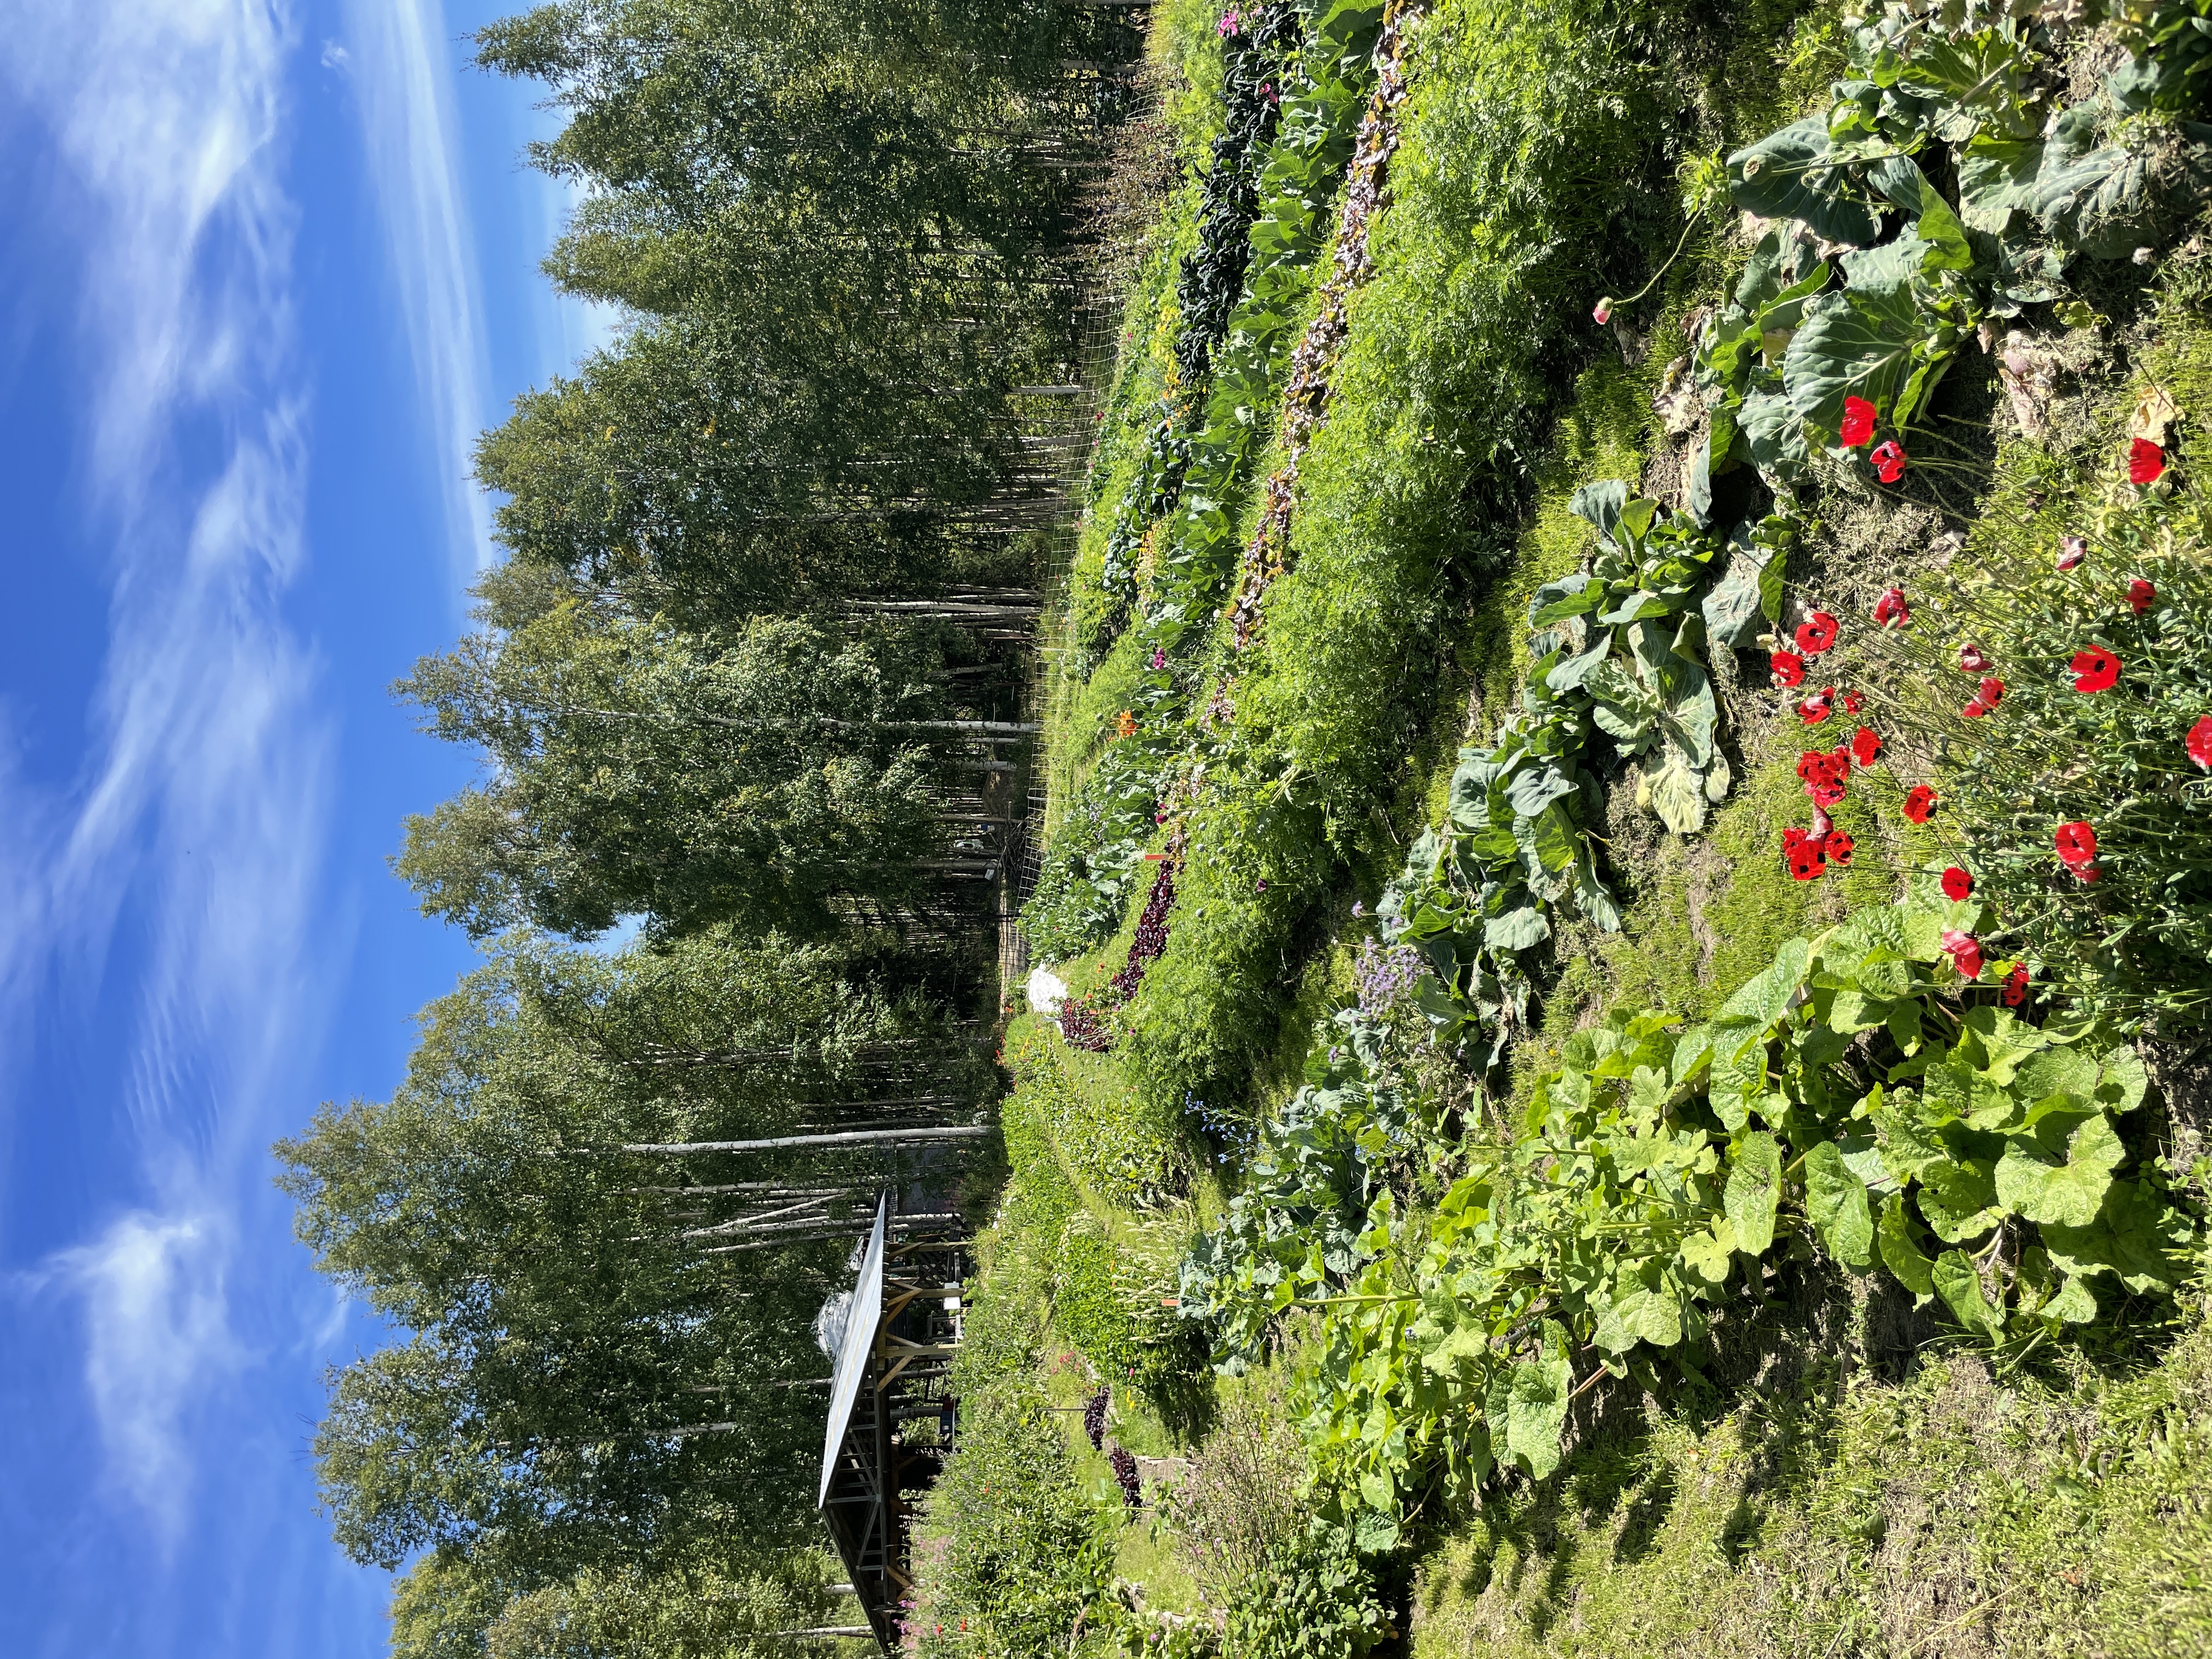 An image of the farm, with rows of vegetables and flowering plants.